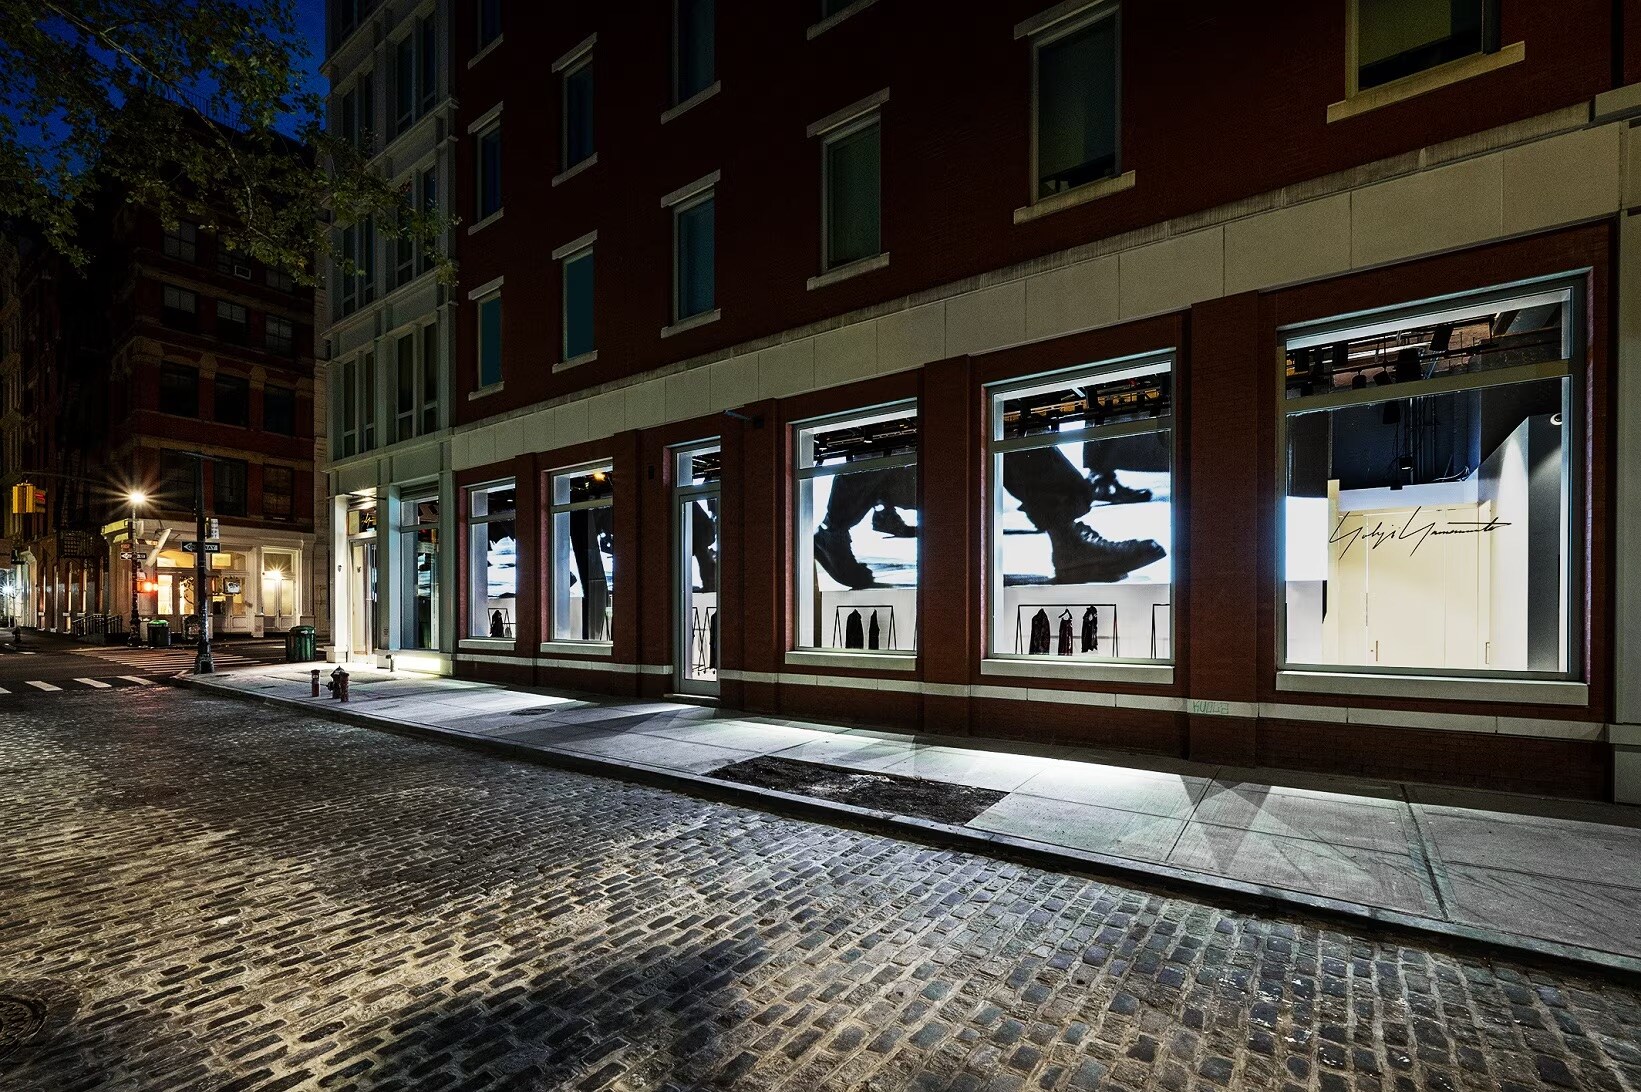 Yohji Yamamoto New York Wooster
ーNew Concept Boutique Openー